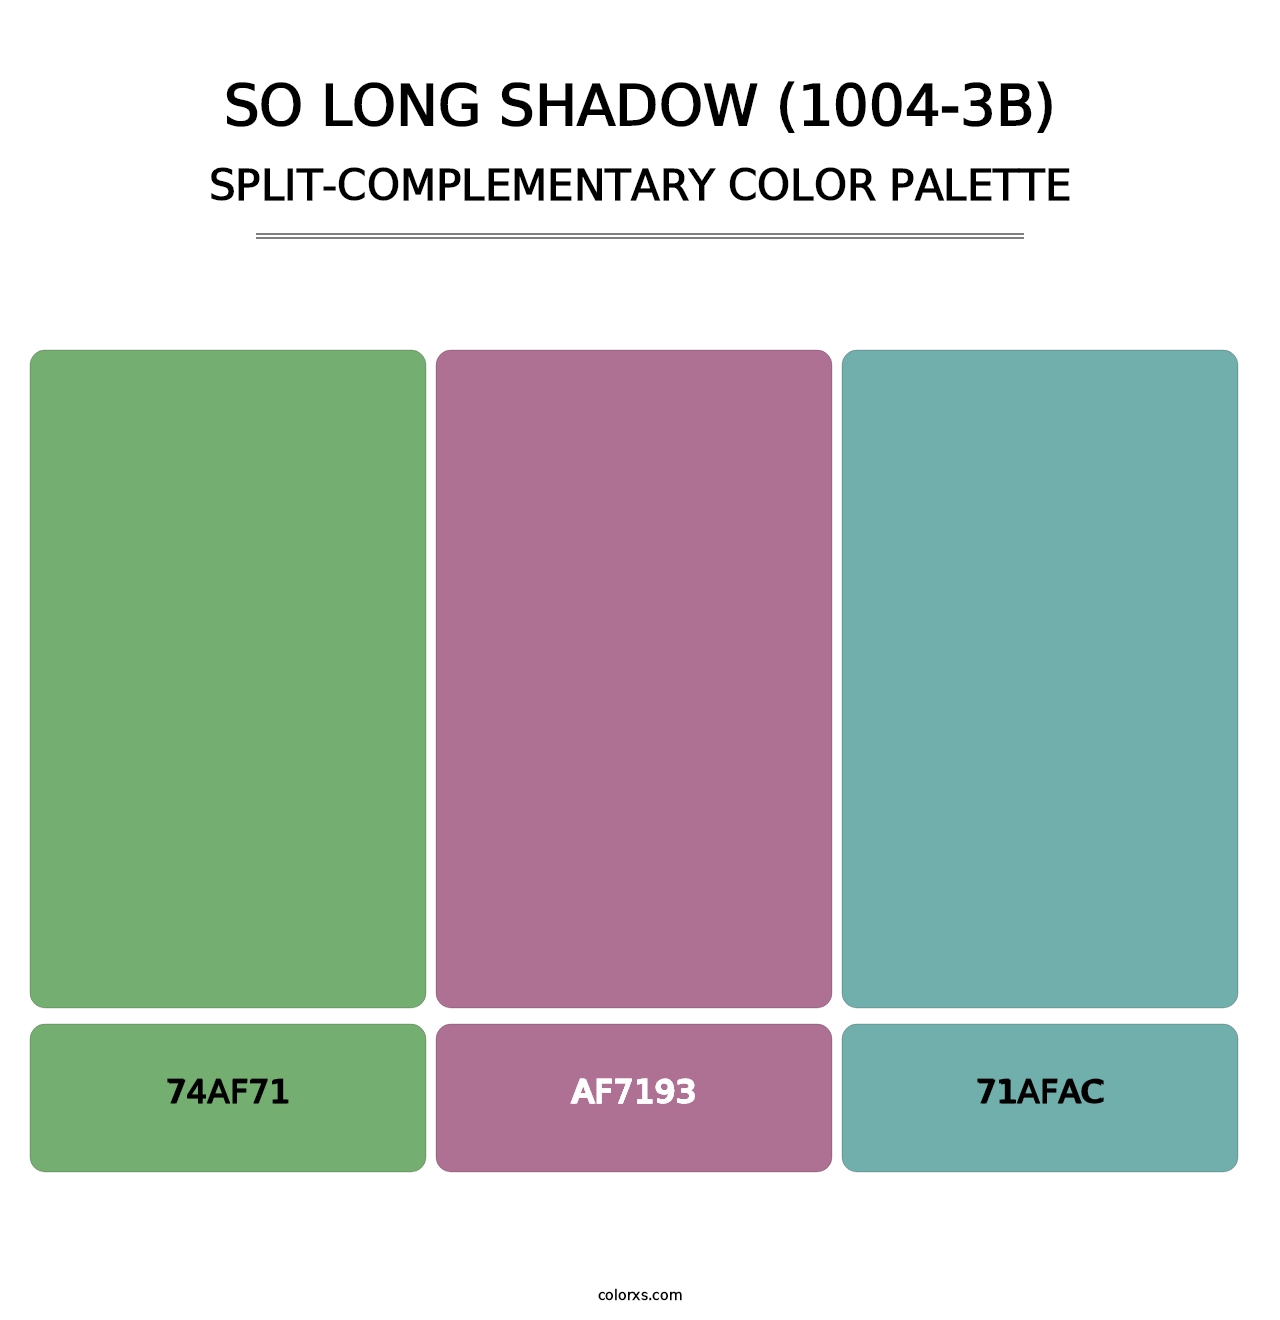 So Long Shadow (1004-3B) - Split-Complementary Color Palette